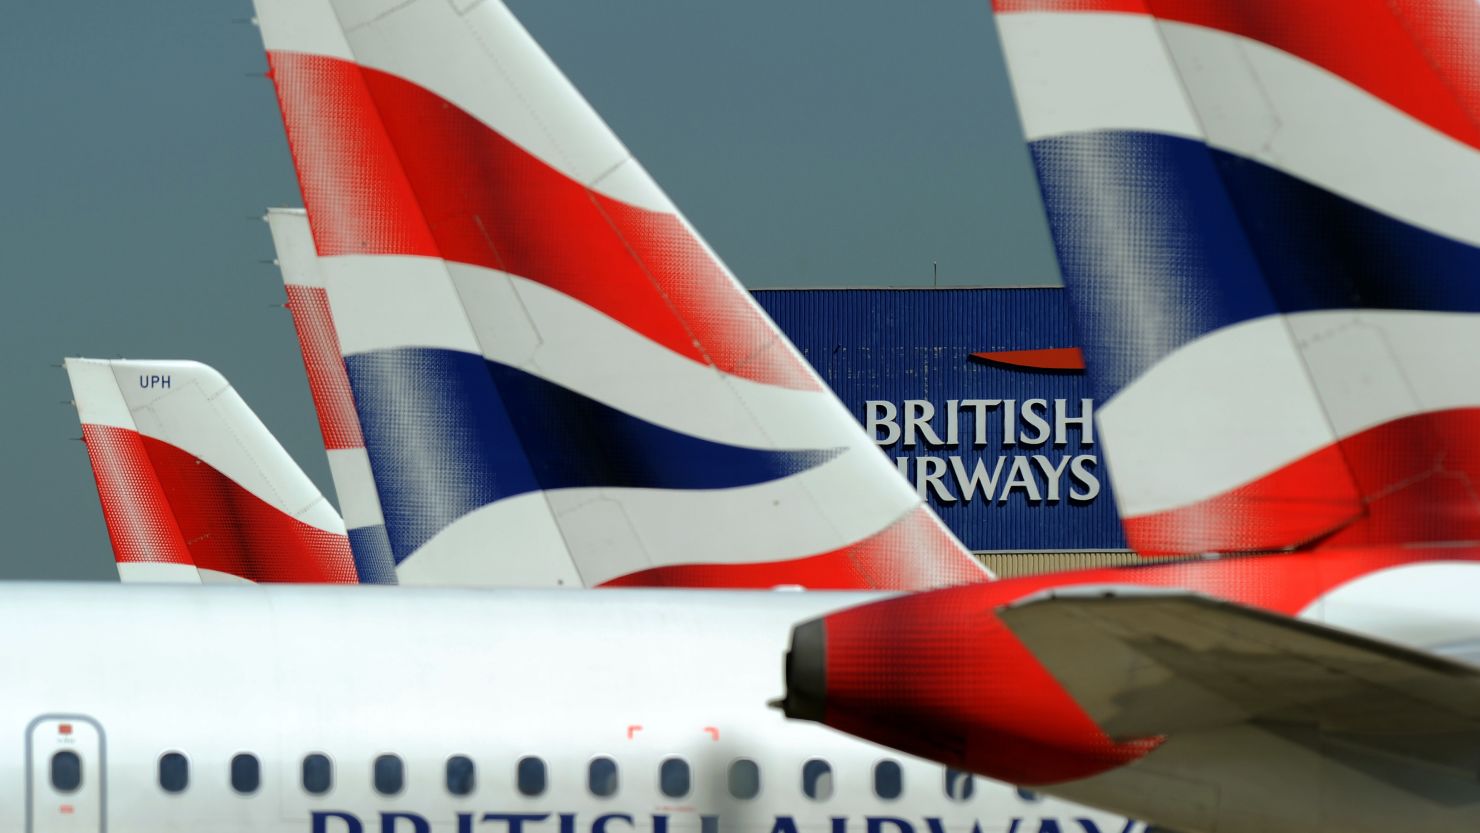 British Airways is "taking this matter extremely seriously" and assisting police, an airline spokesman says. 